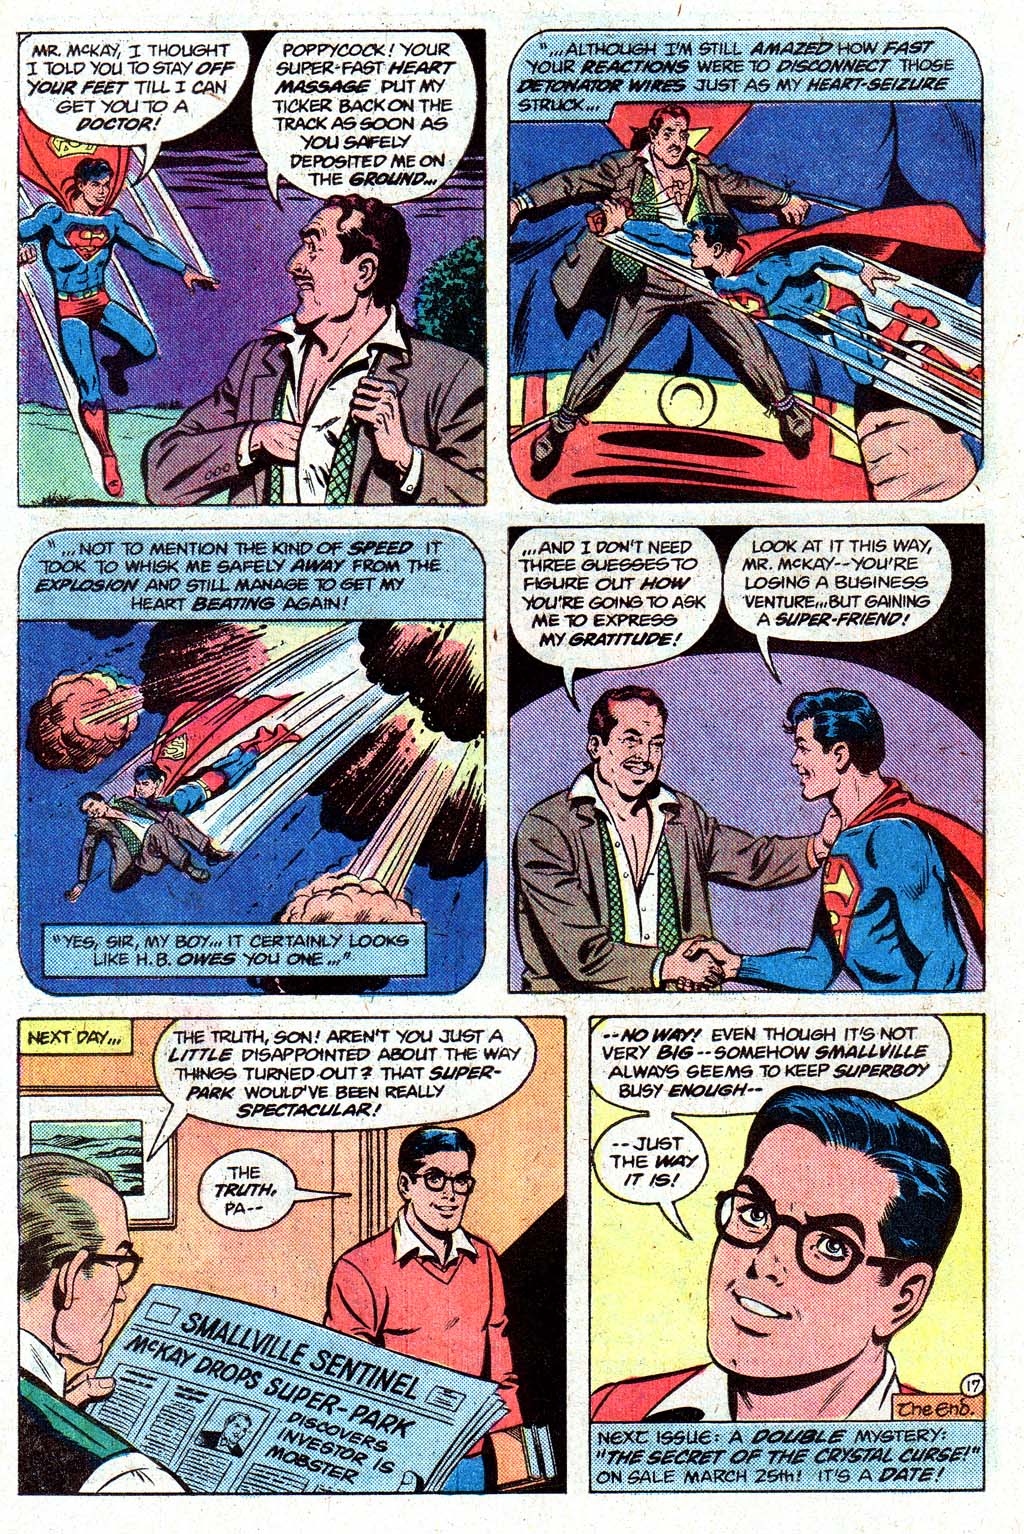 The New Adventures of Superboy 29 Page 21